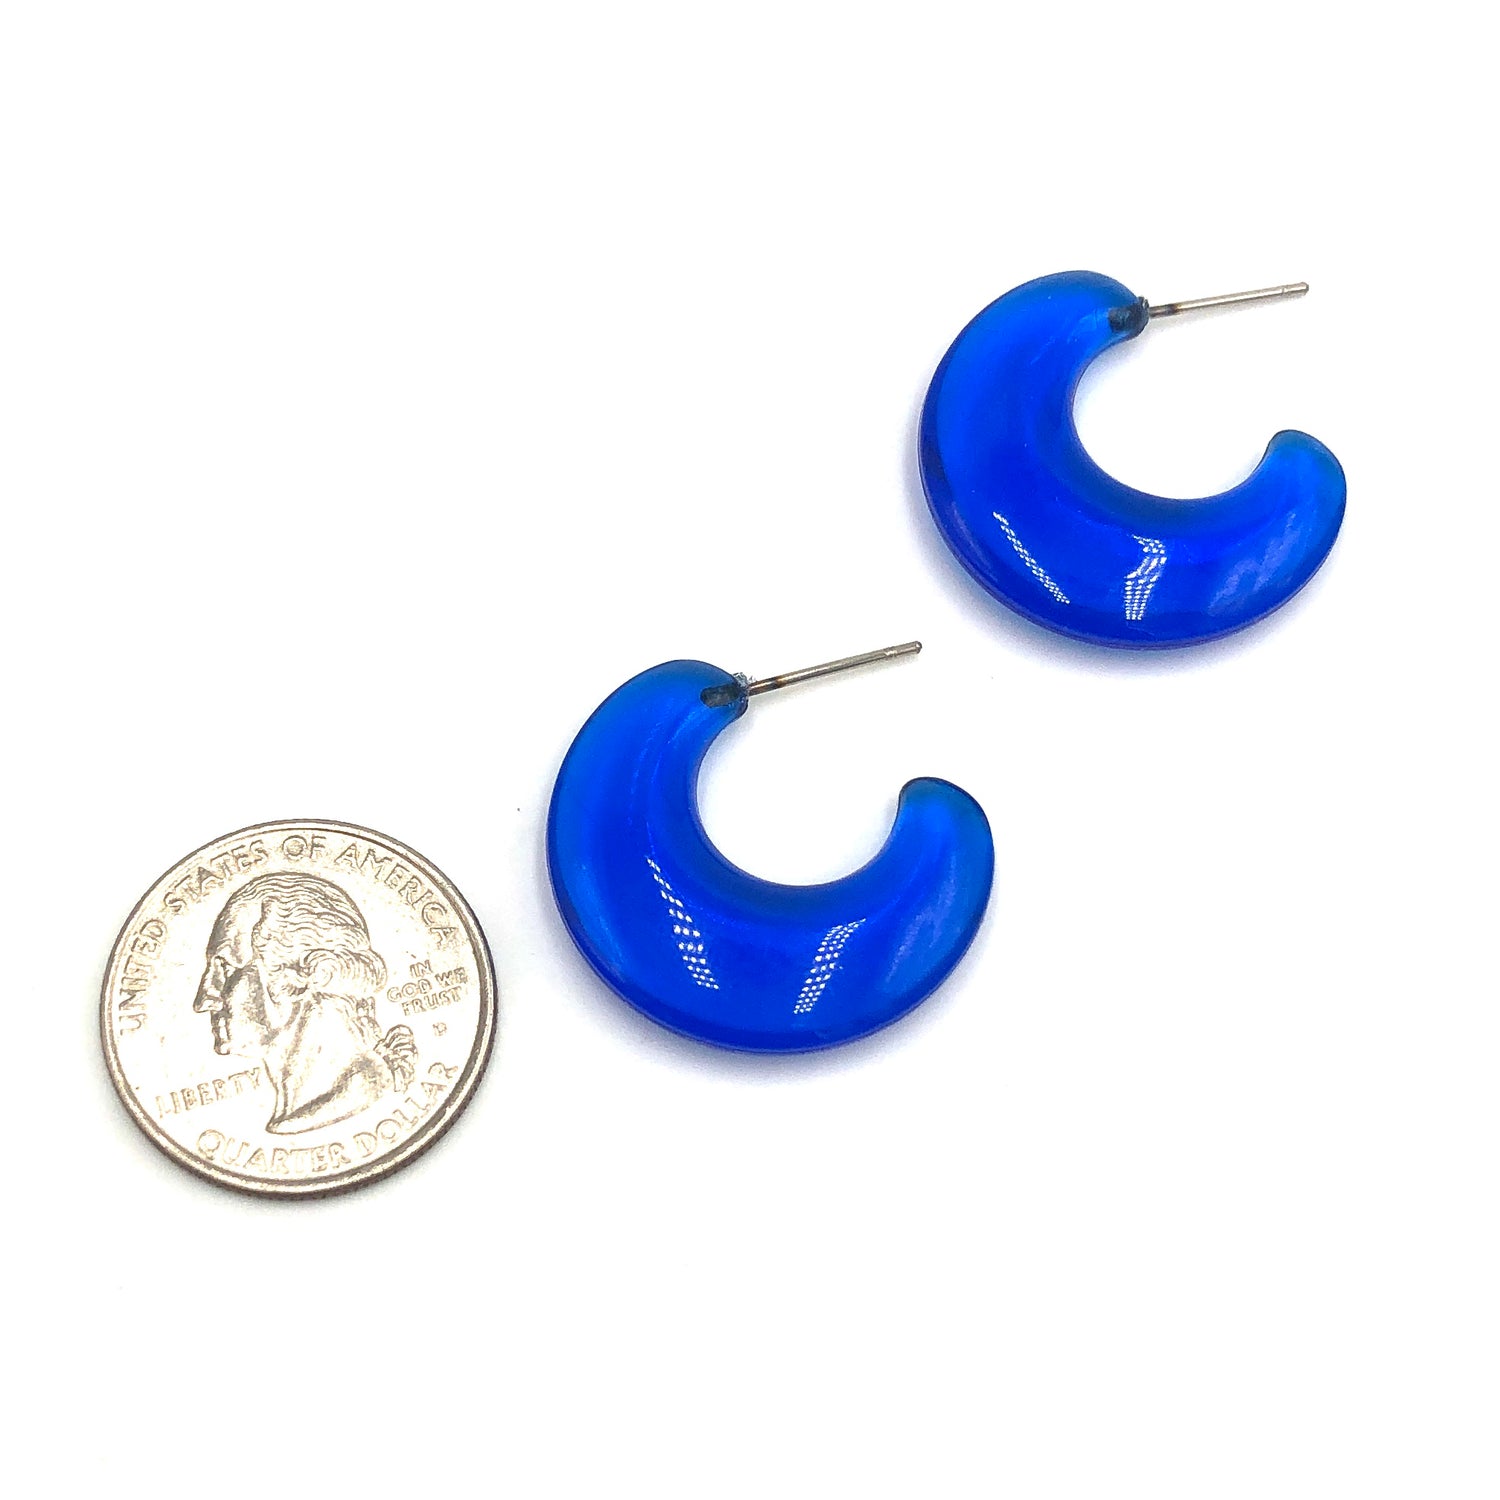 quarter in picture next to capri blue flat hoop earrings to show size